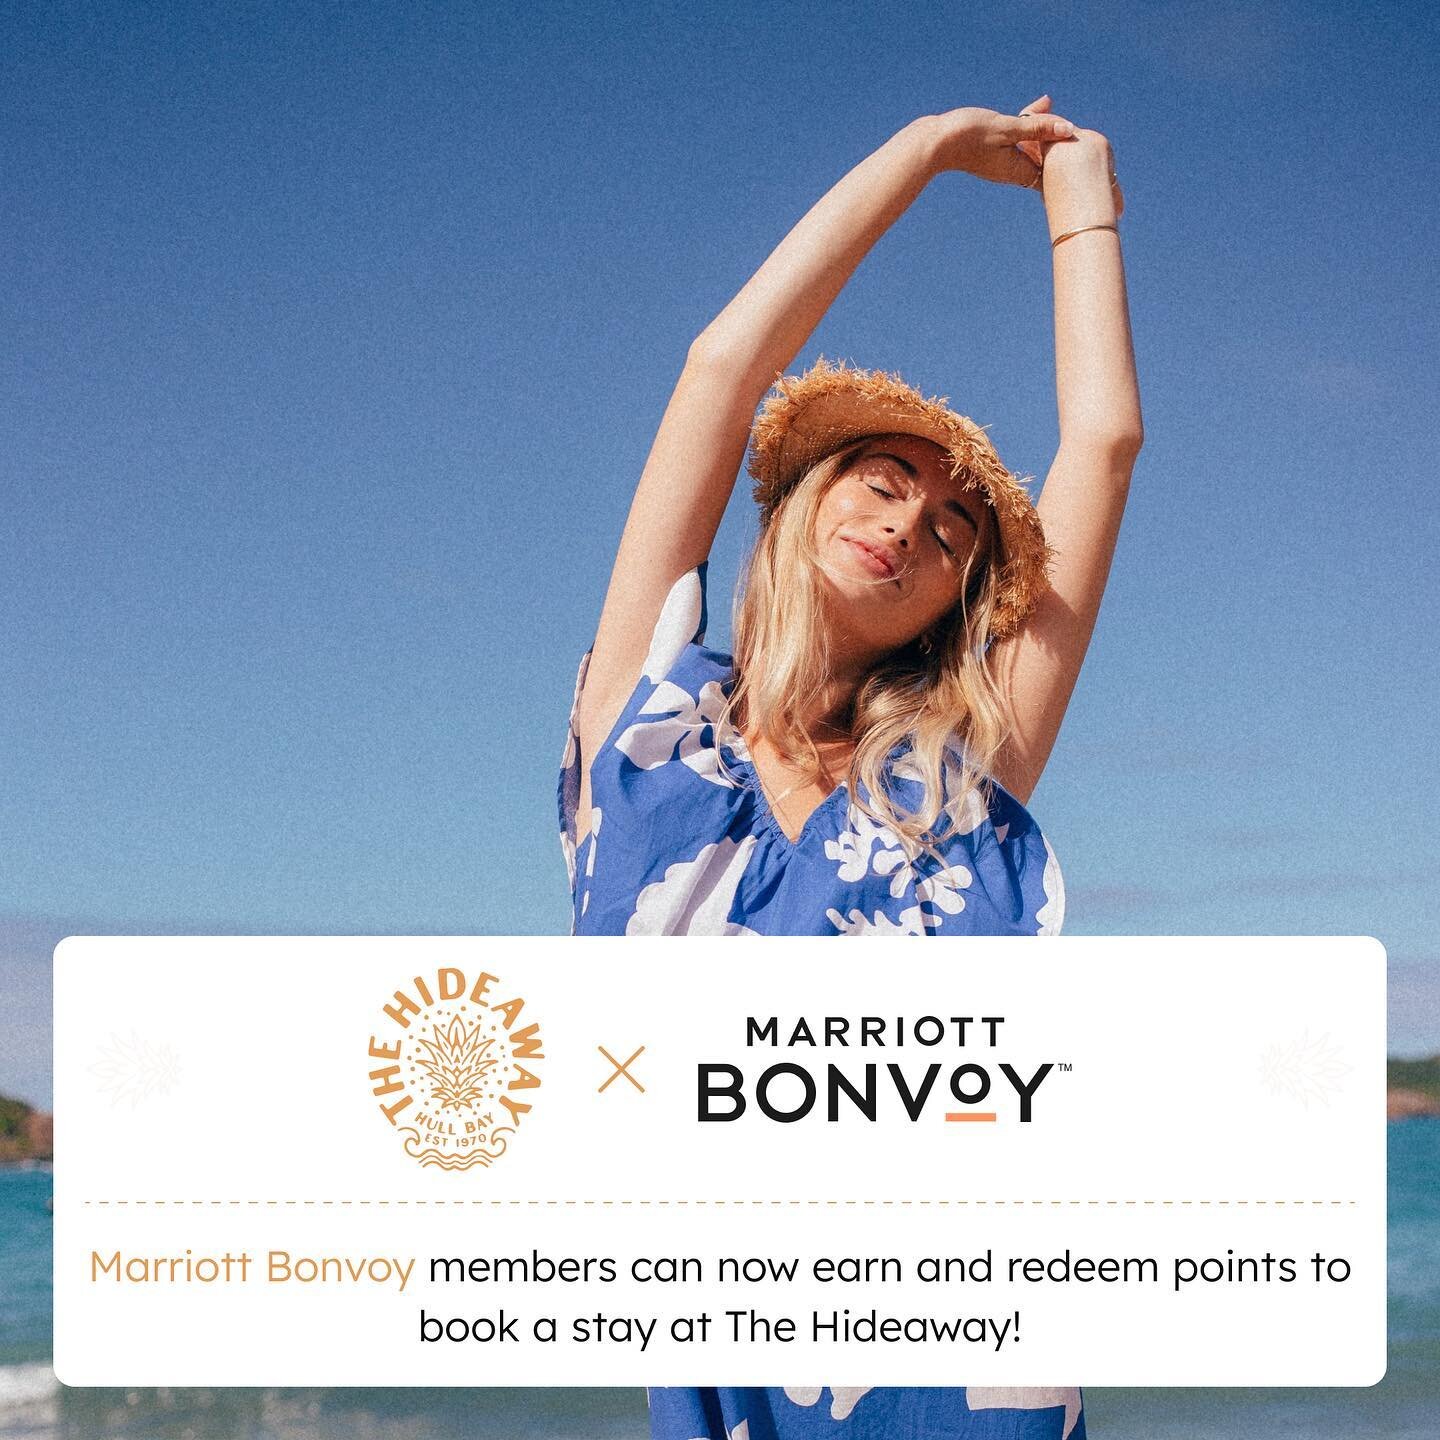 Hello 👋 Marriott Bonvoy members! Are you looking to get away to a lush Caribbean oasis? Look no further &mdash; The Hideaway is proud to announce we are now a home management partner of Homes &amp; Villas by Marriott Bonvoy &mdash;redeem your points